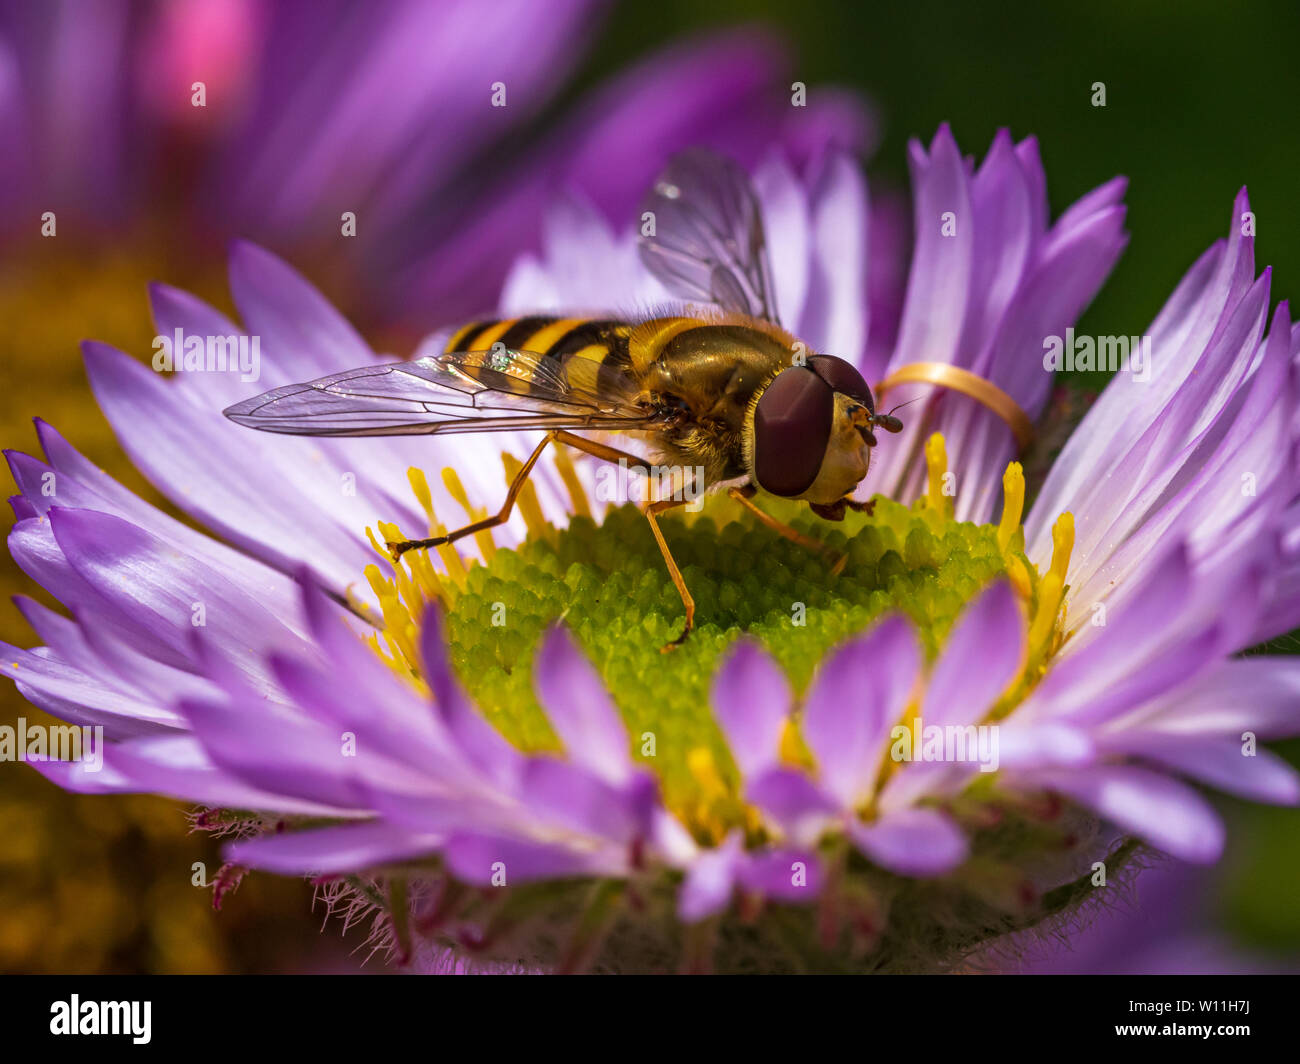 Male Epistrophe grossulariae hoverfly pollinating a purple aster flower in an English garden Stock Photo